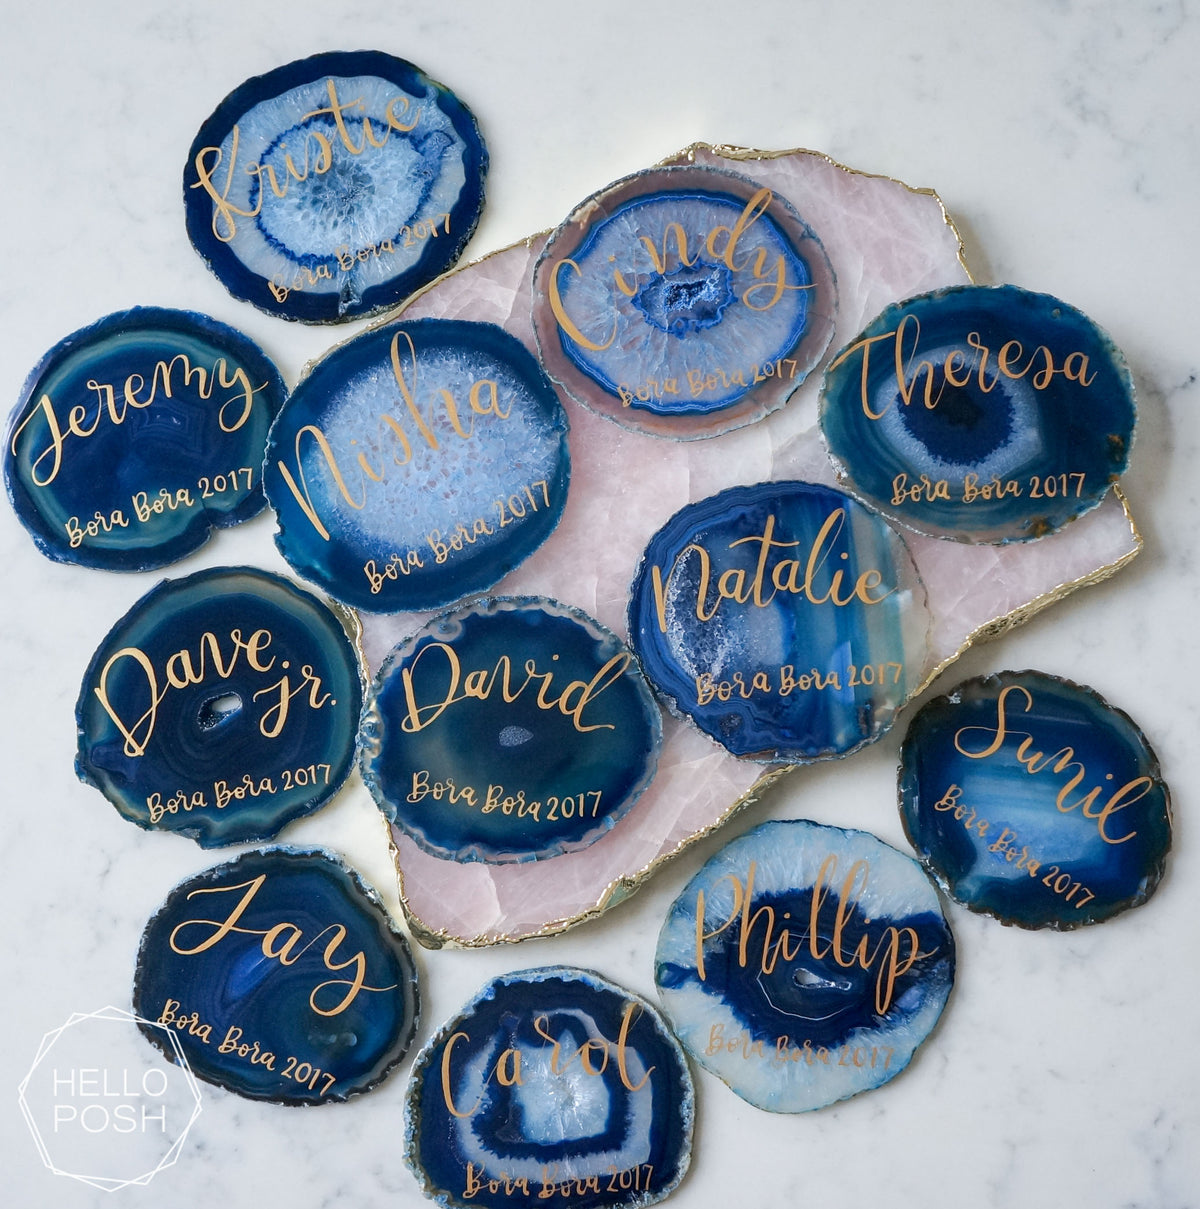 4" Agate coaster place cards